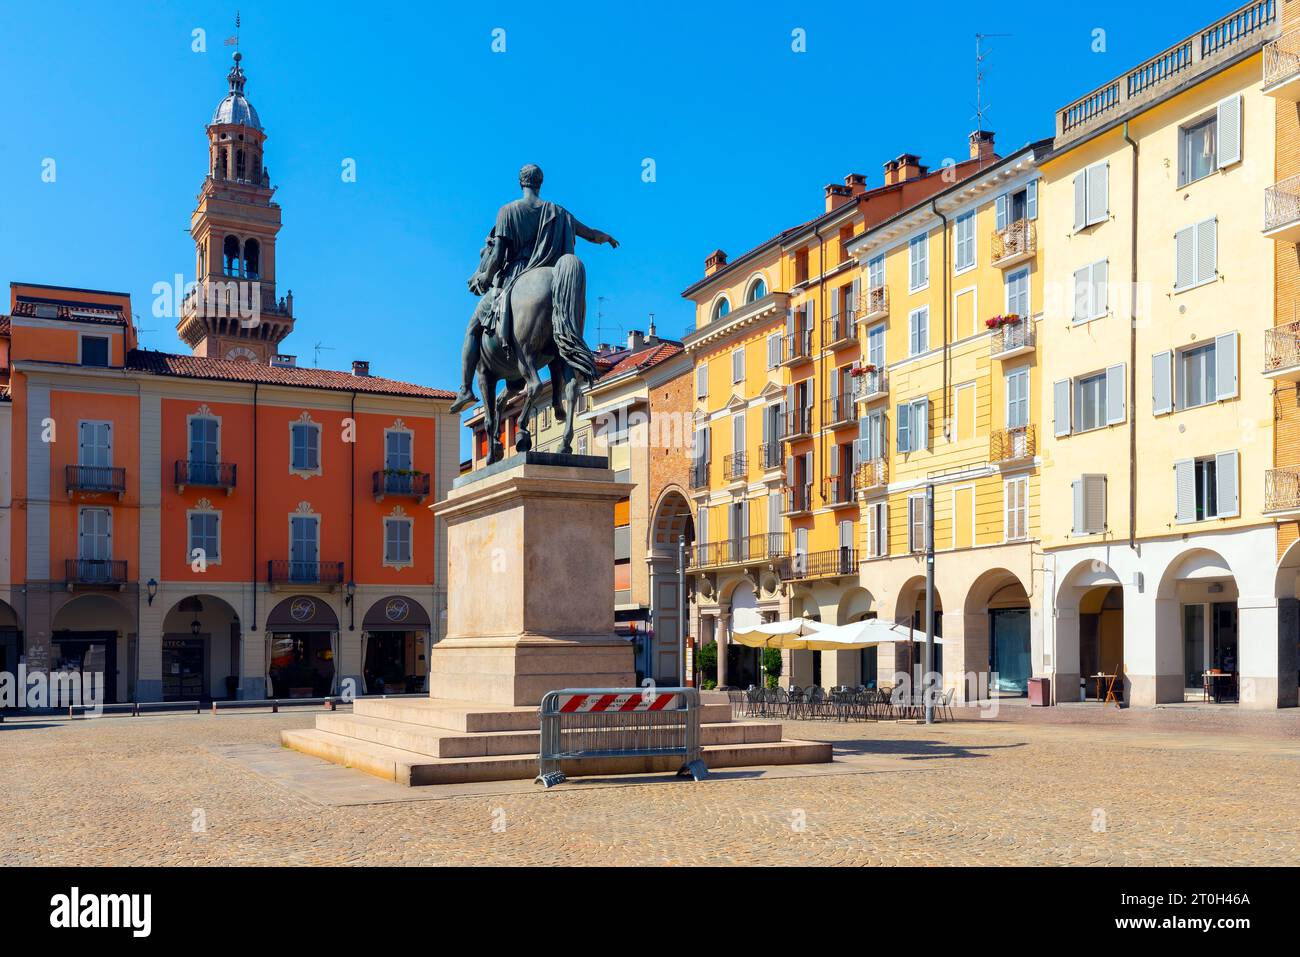 Piazza Giuseppe Mazzini. The historic town of Casale Monferrato  is a beautiful small Italian town located in the Piedmont region of northern Italy. Stock Photo